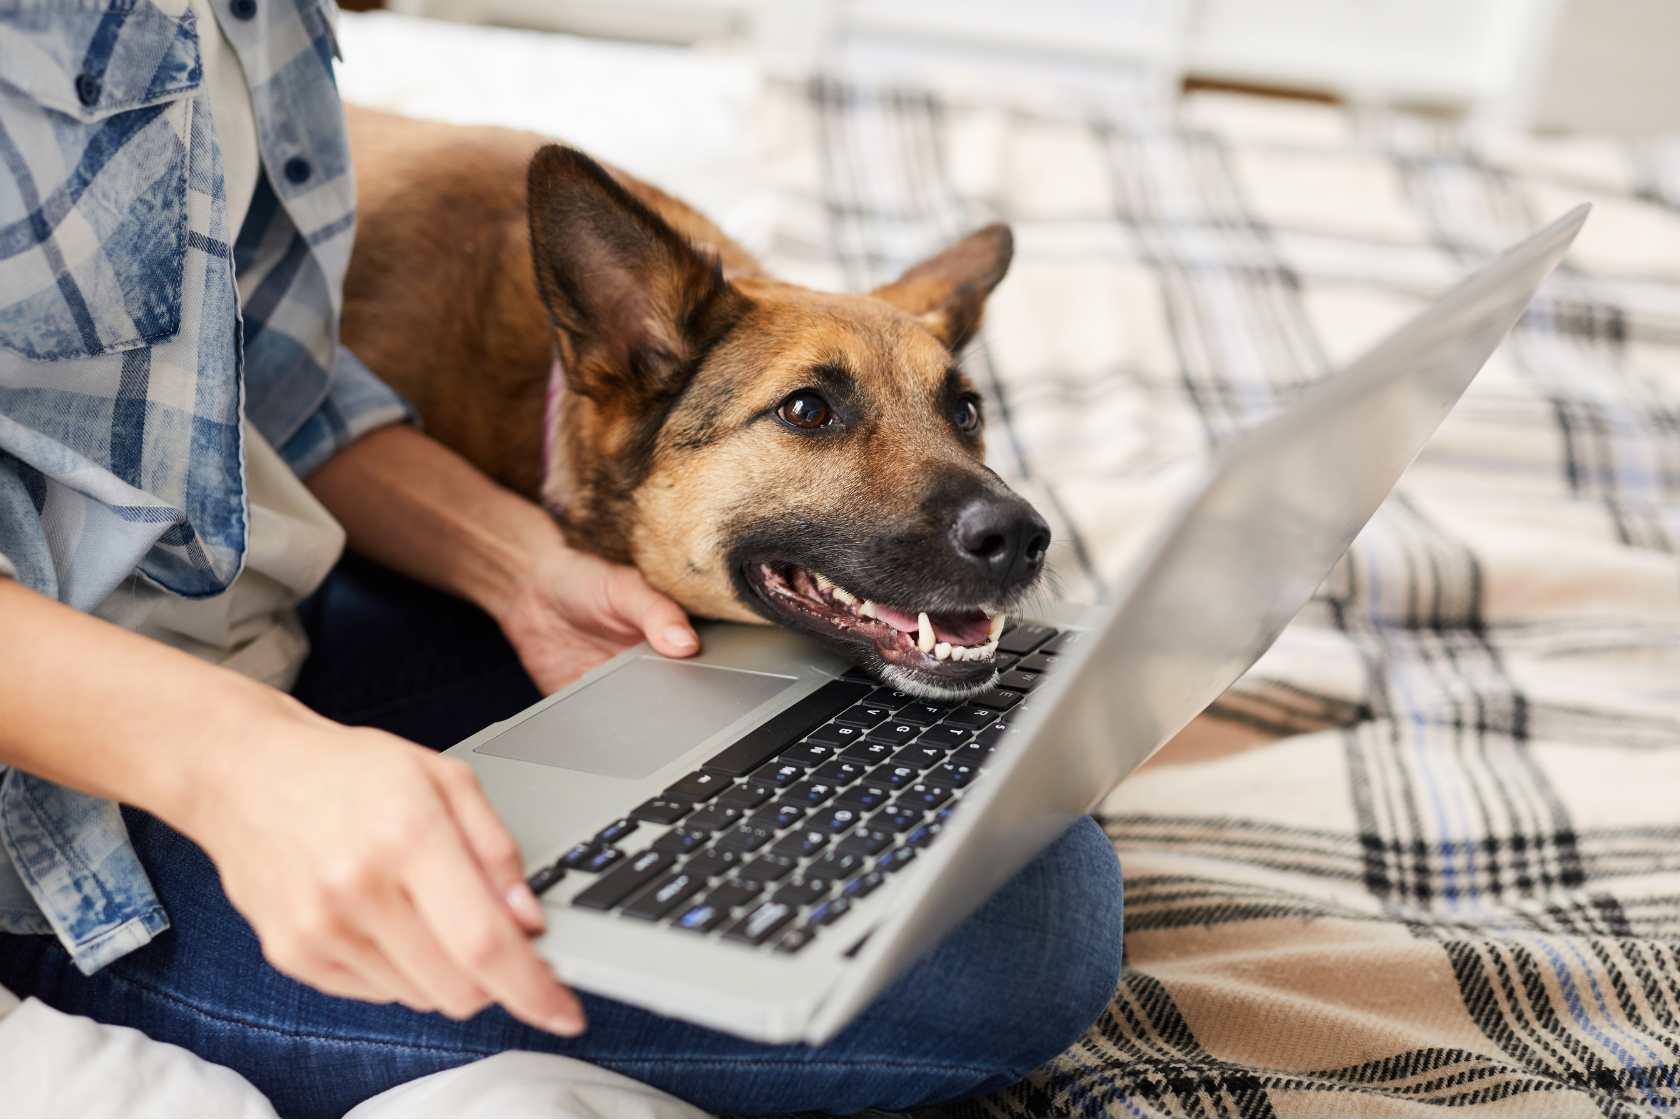 Man working on a laptop with a dog leaning over the laptop